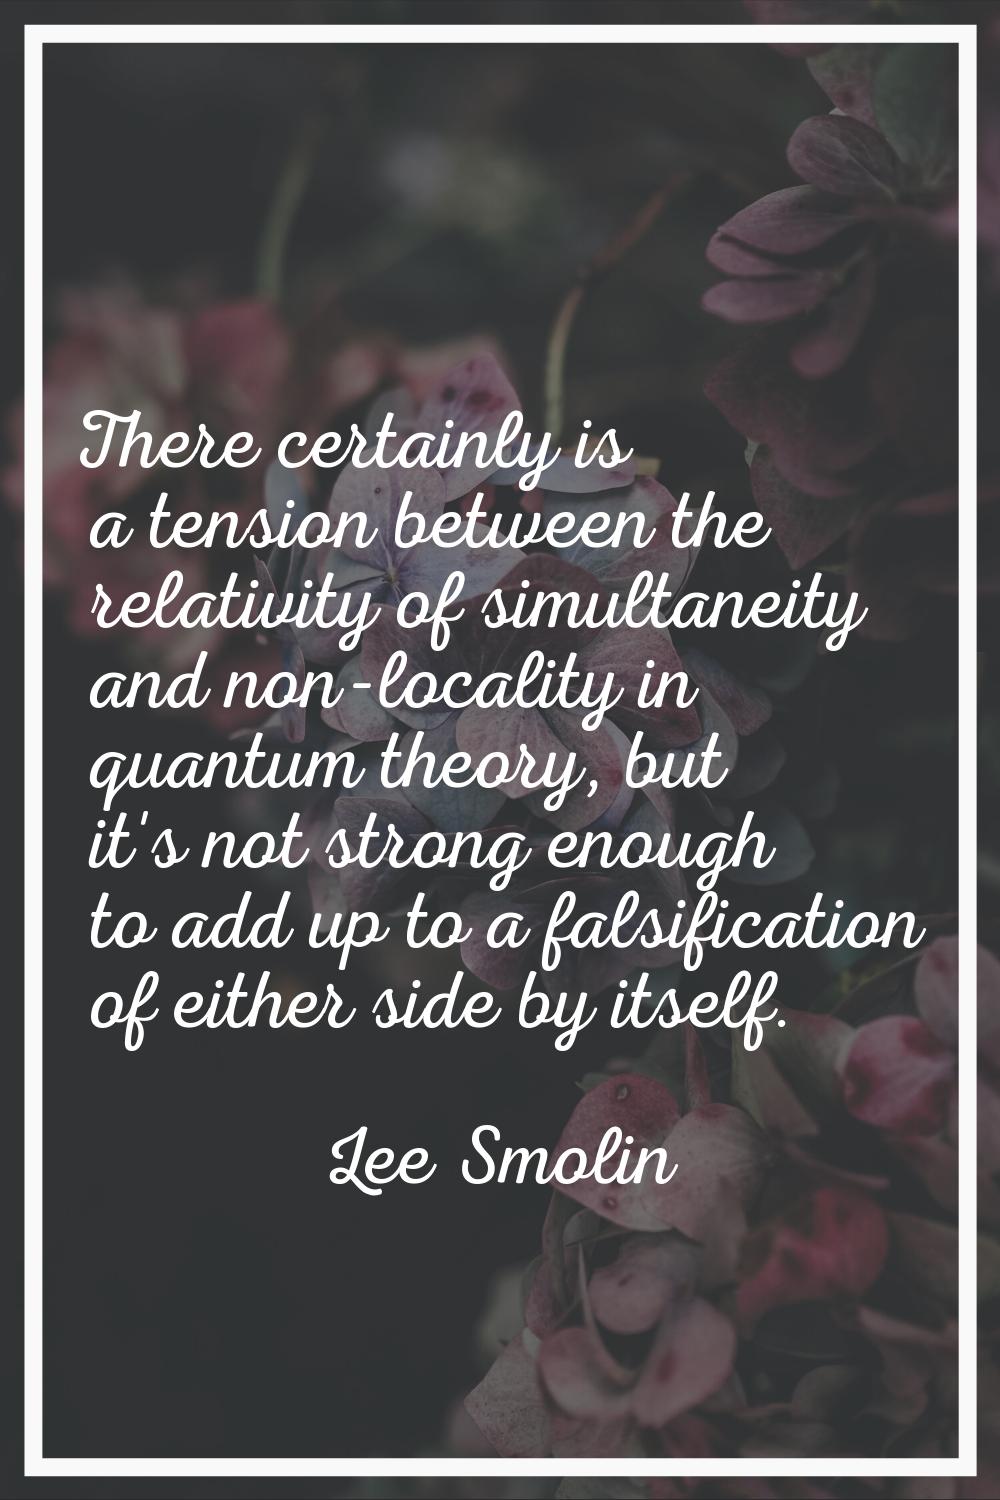 There certainly is a tension between the relativity of simultaneity and non-locality in quantum the